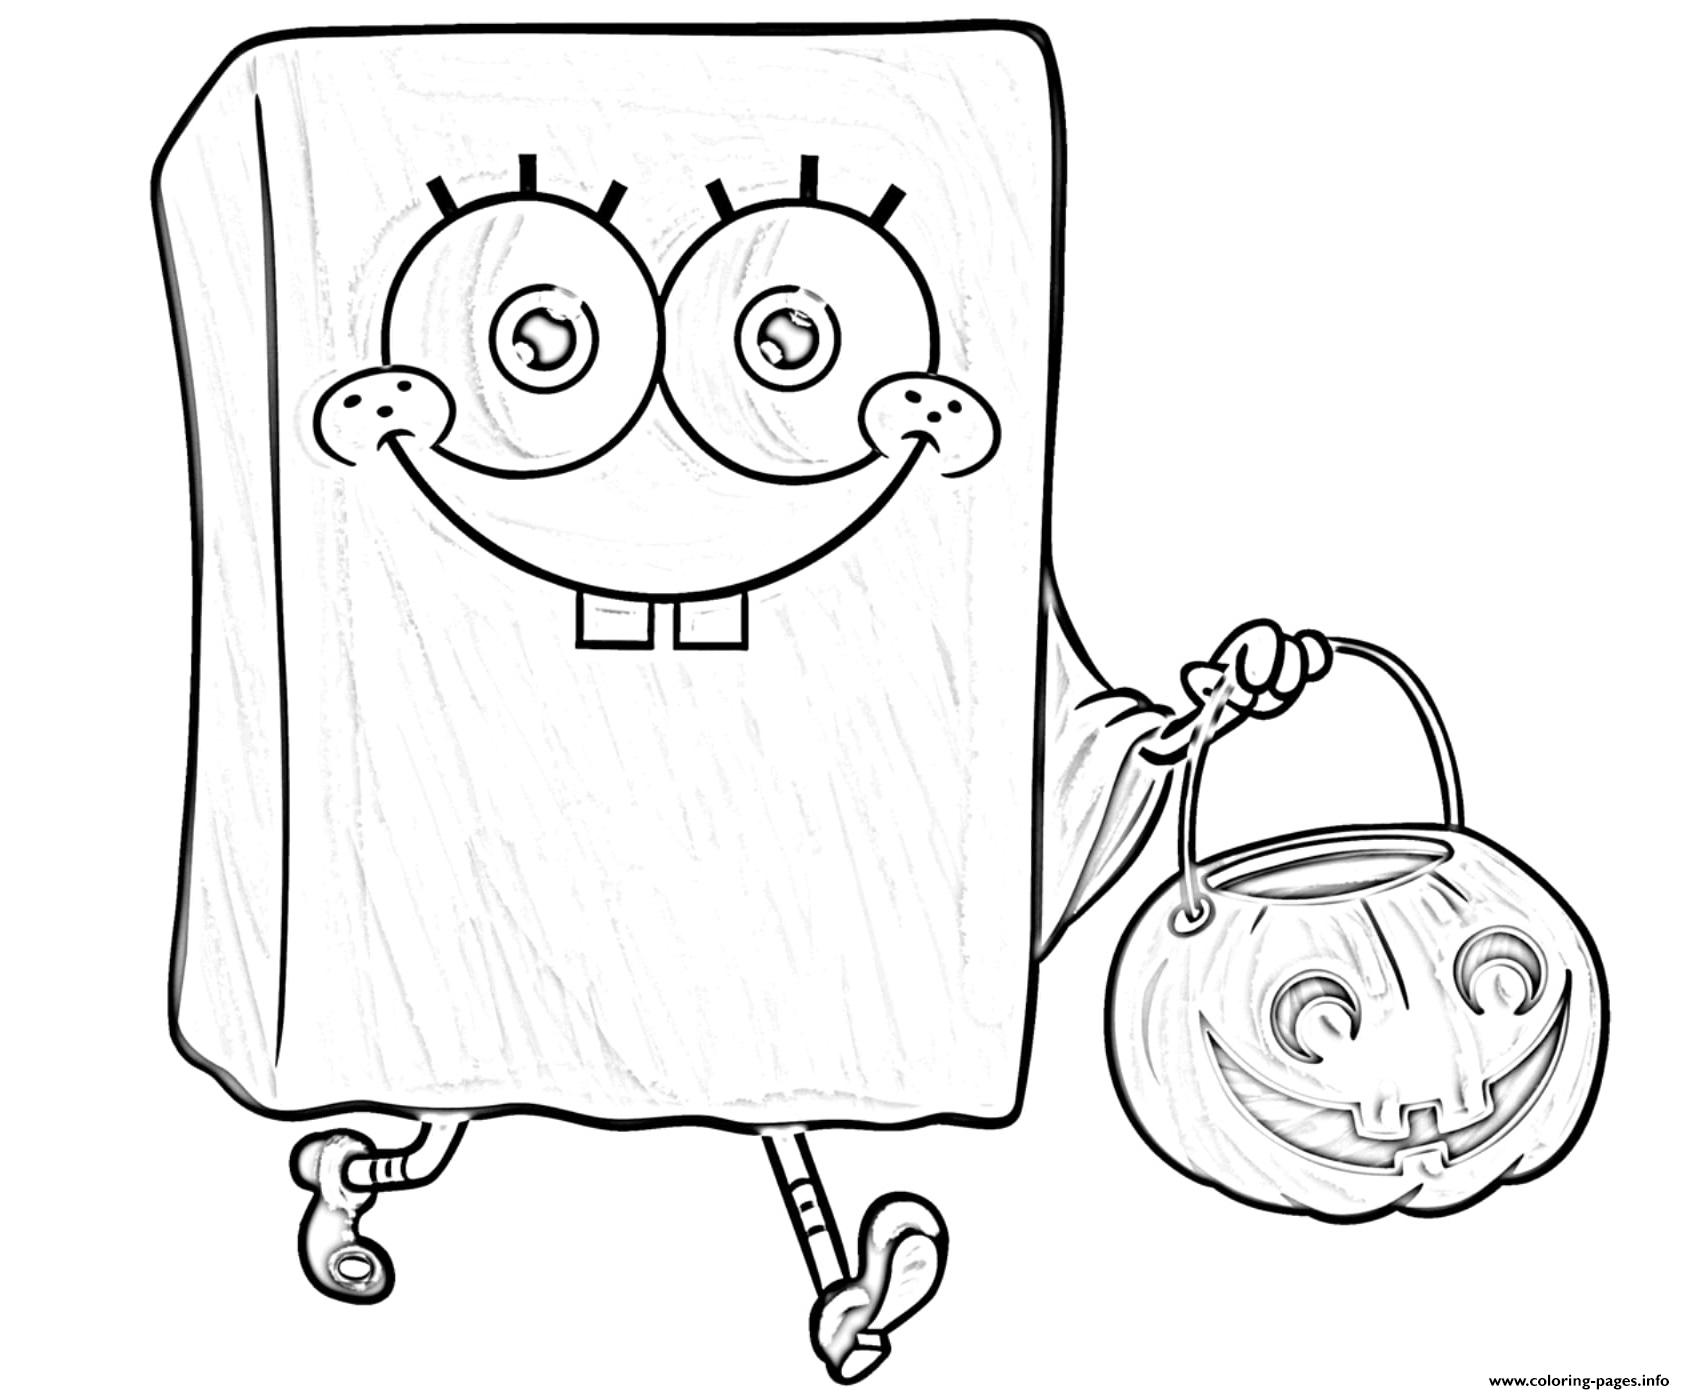 64 Spongebob Halloween Coloring Pages Download Free Images